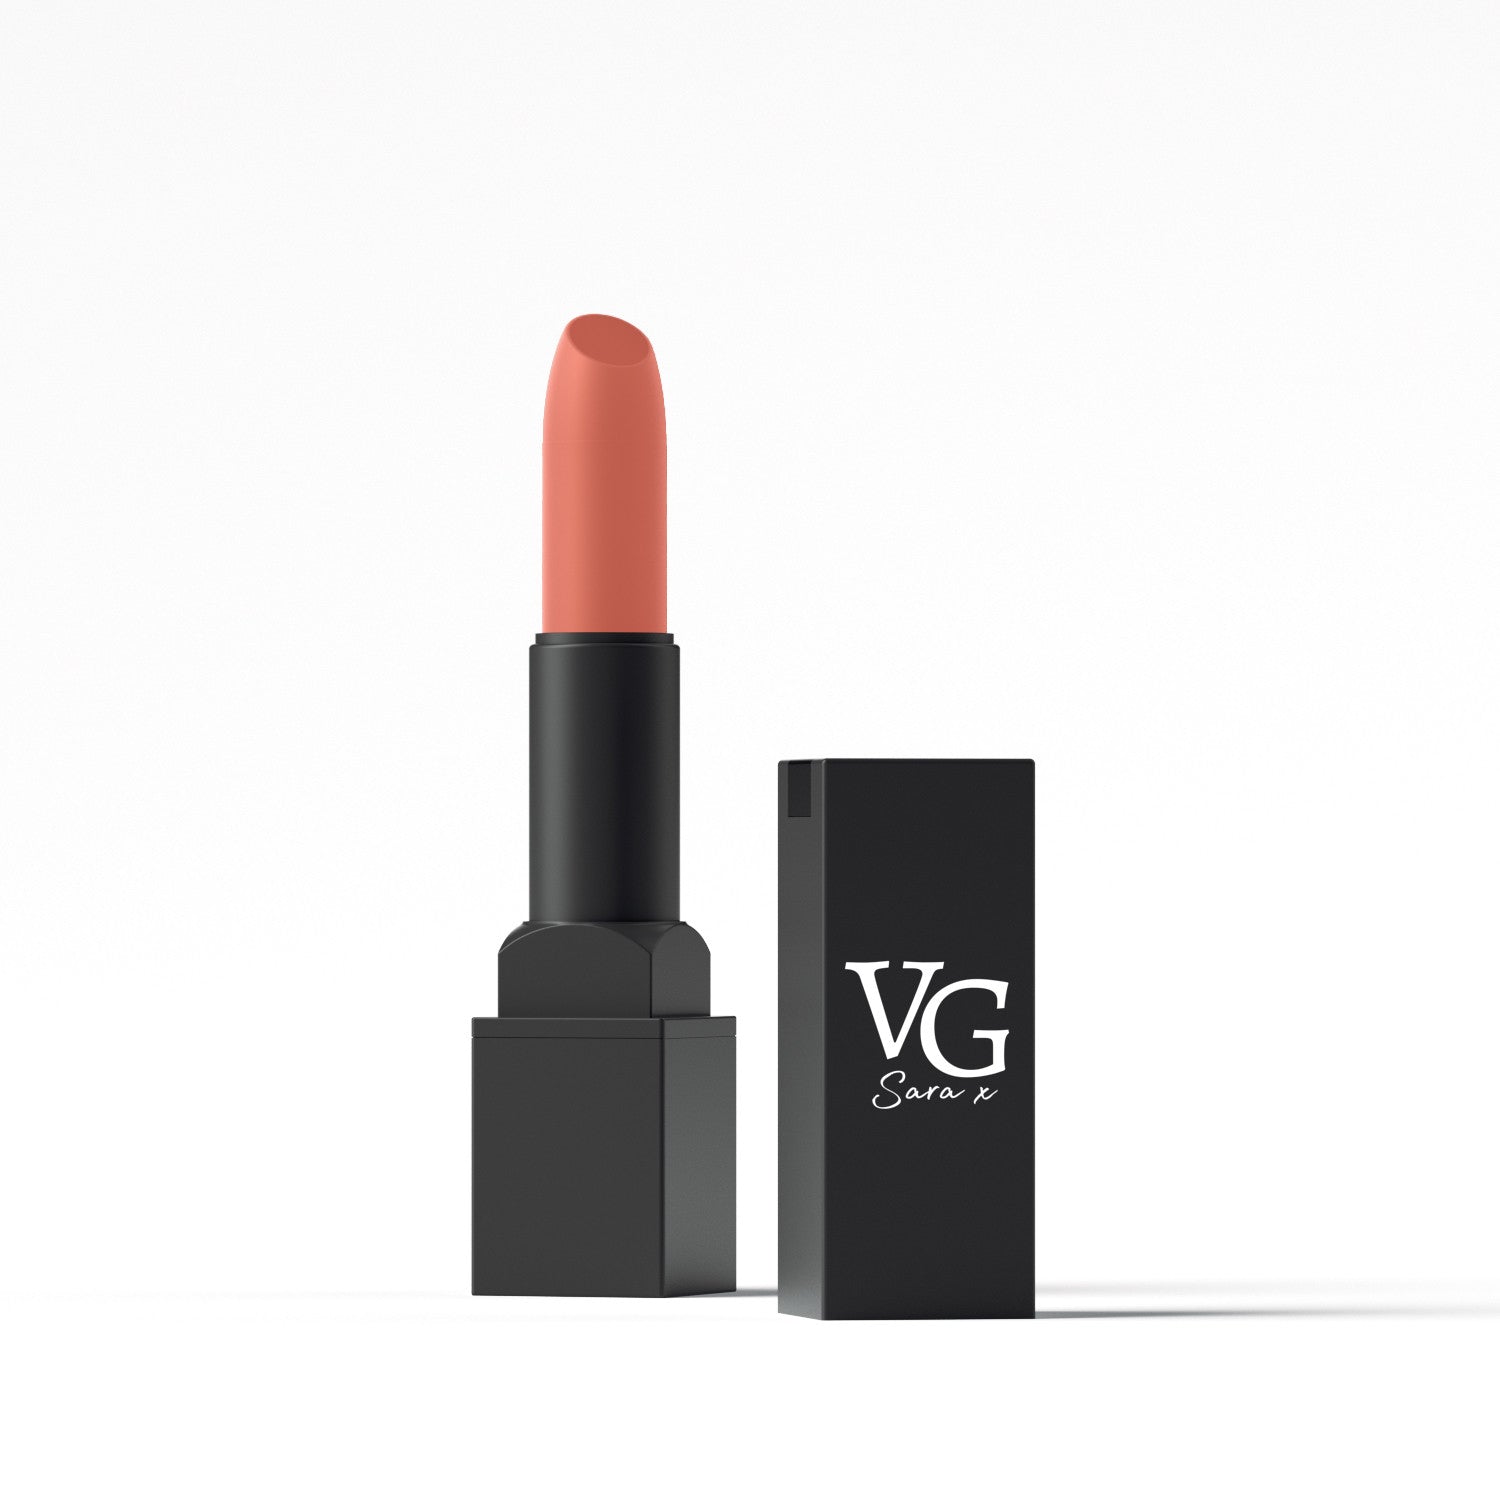 VG Cosmetics hydrating lipstick with its distinctive packaging